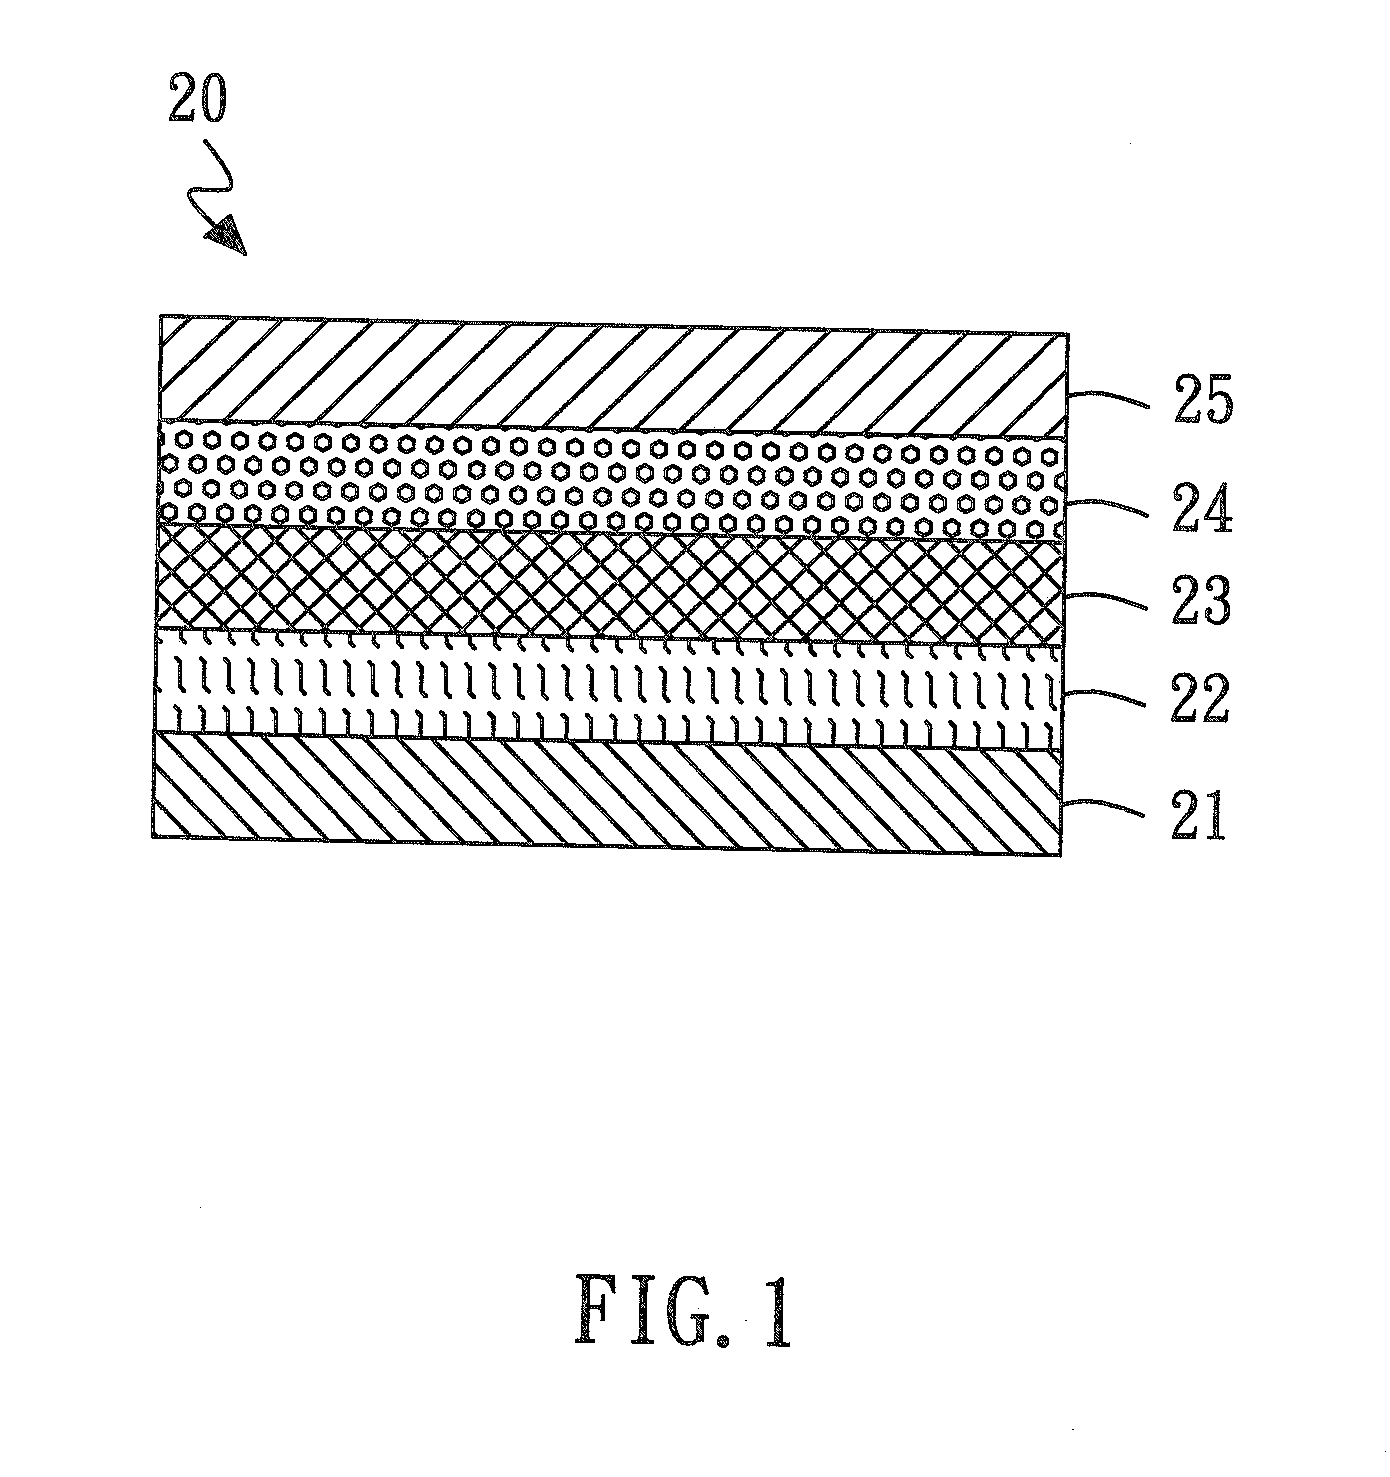 Optoelectronic device having a sandwich structure and method for forming the same